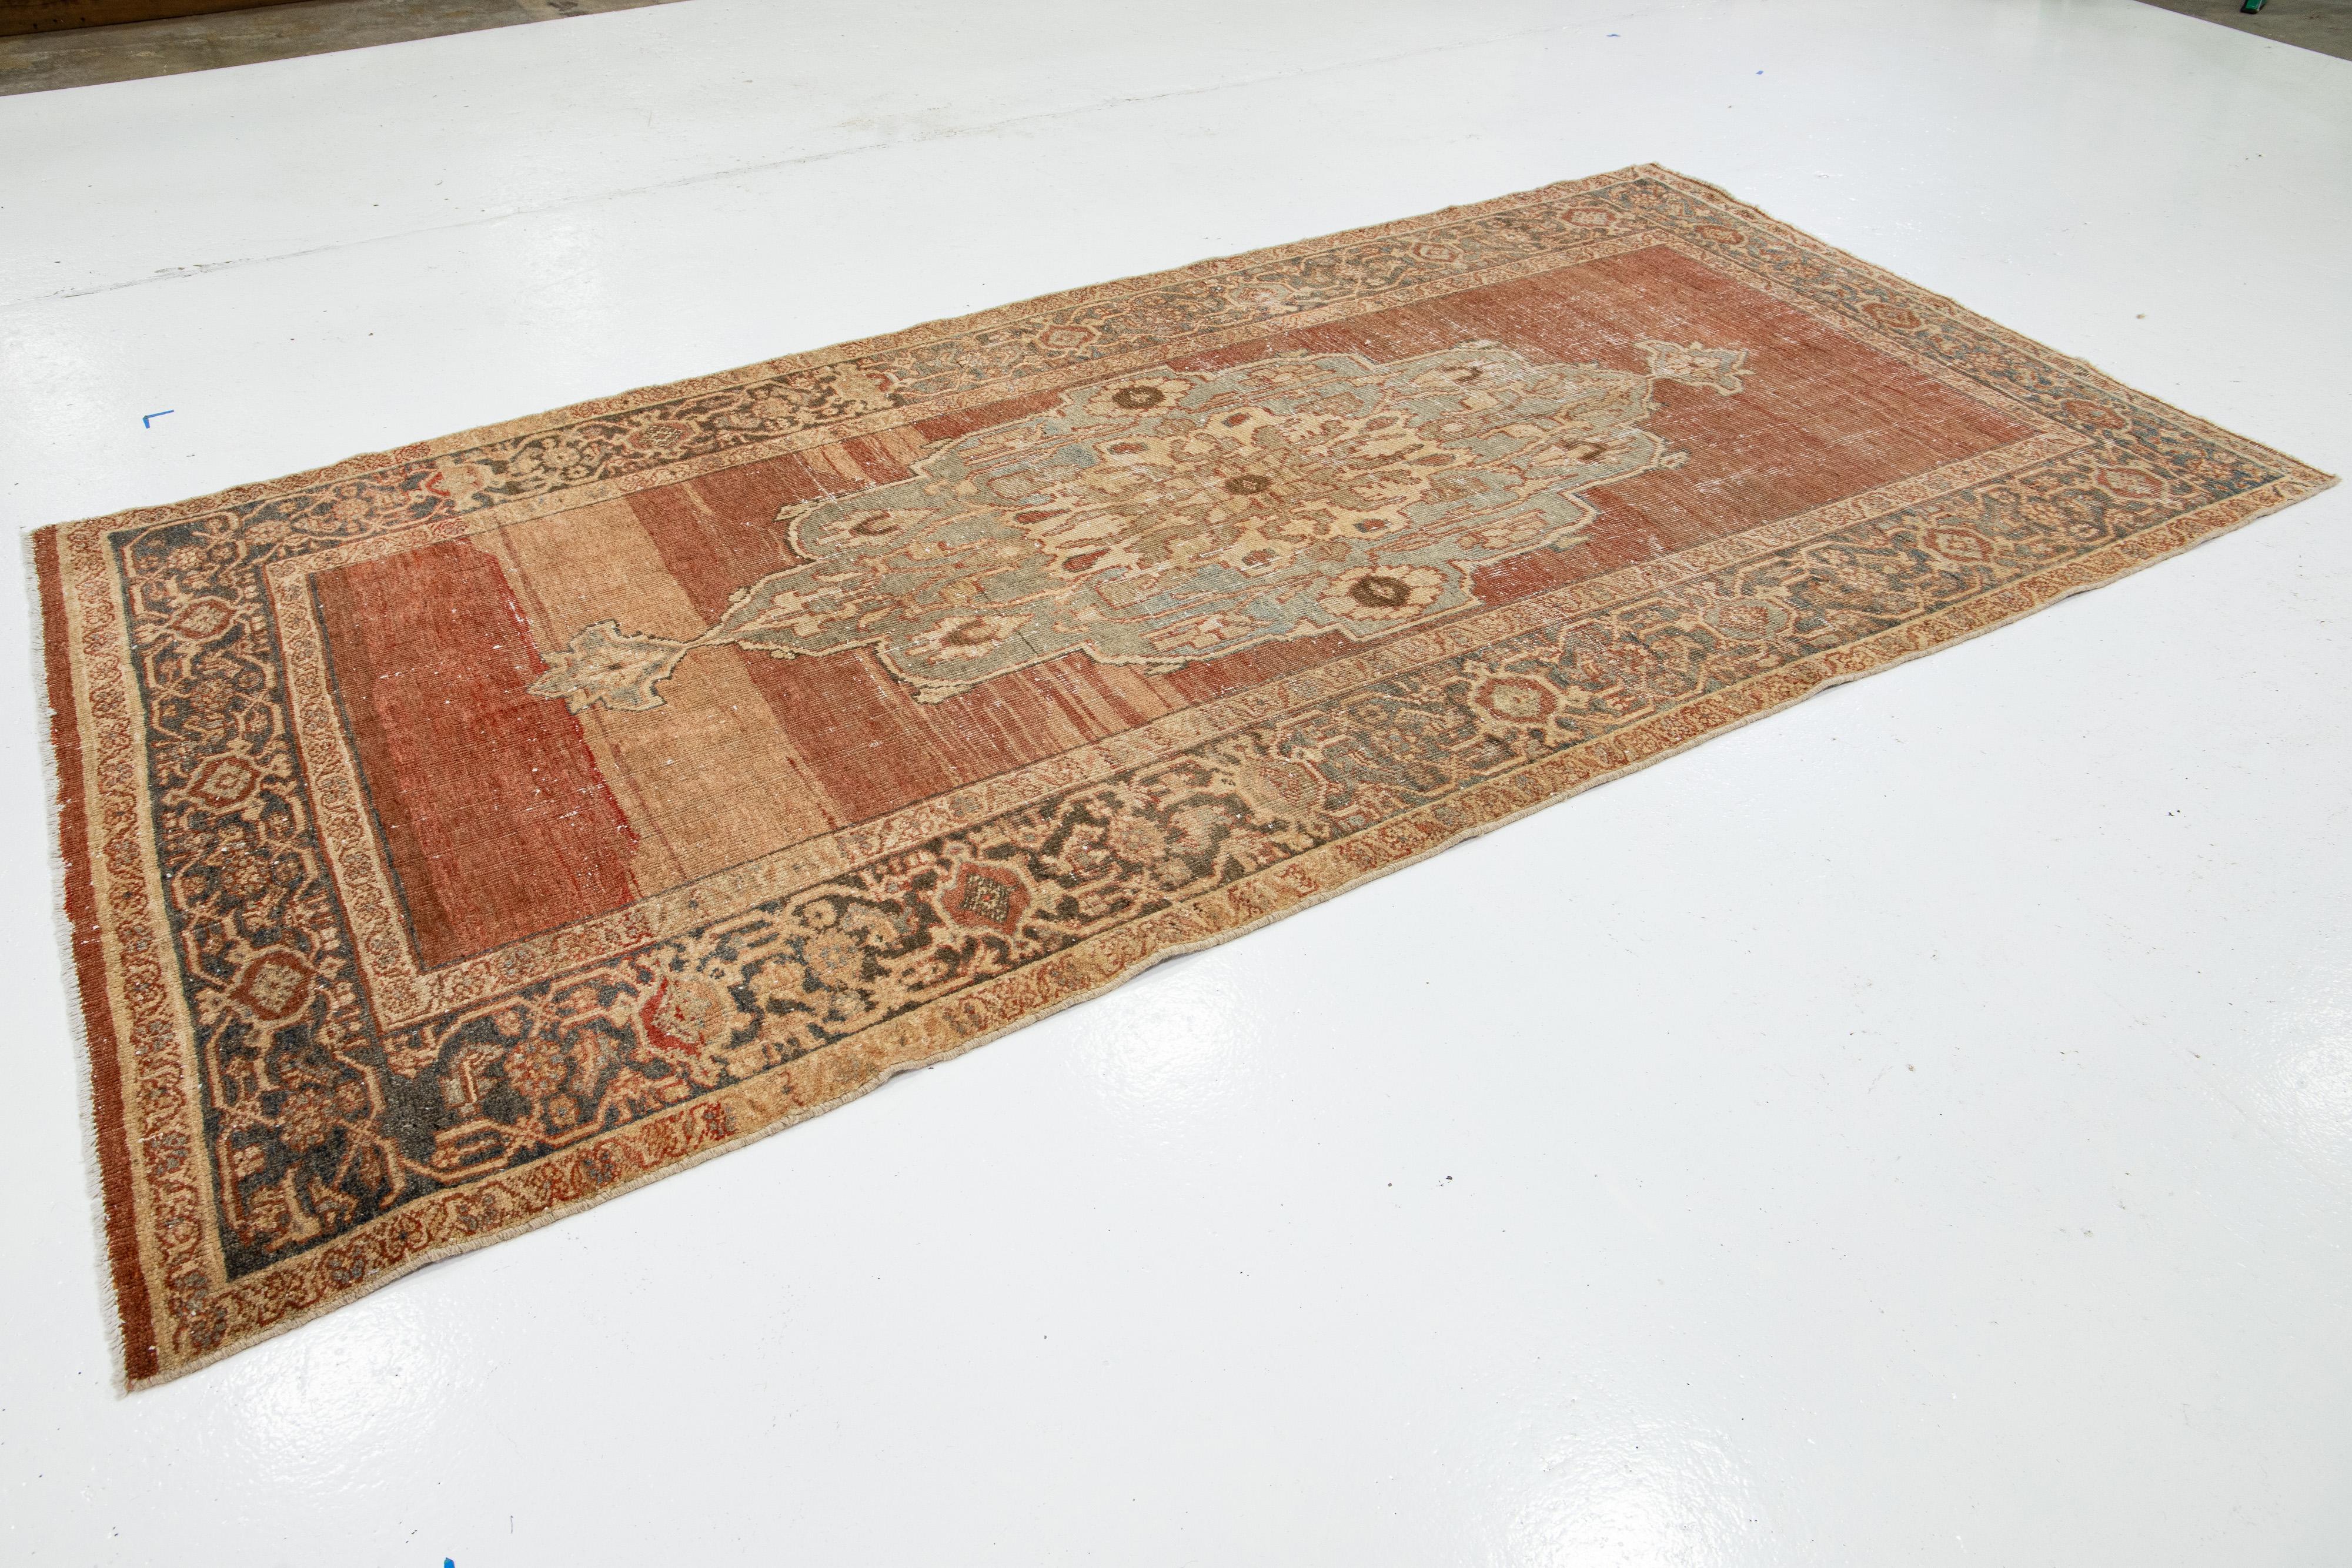 Hand-Knotted Medallion Designed Antique Mahal Wool Rug In Rust Color For Sale